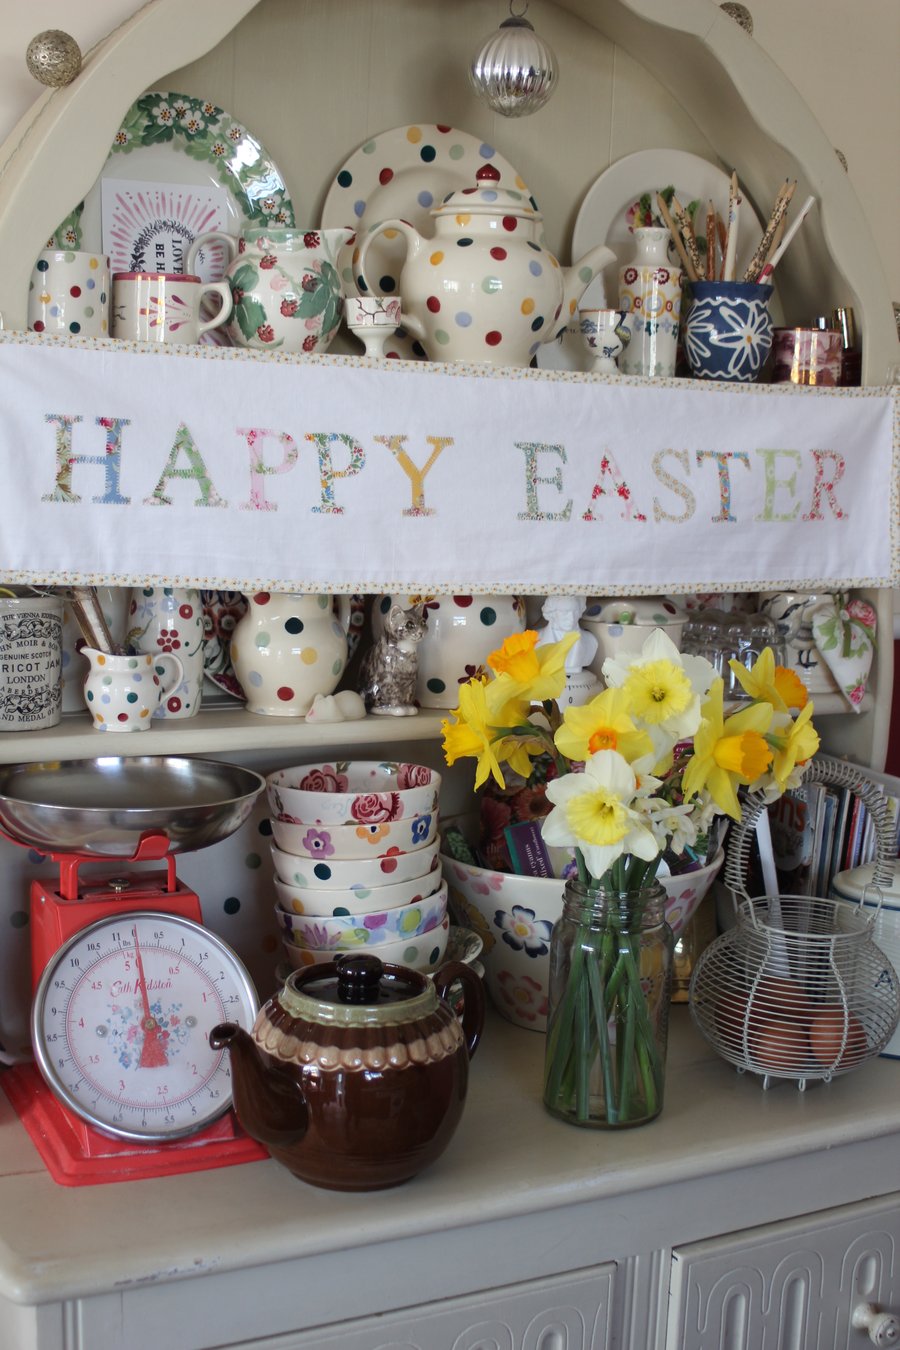 Floral Happy Easter fabric banner